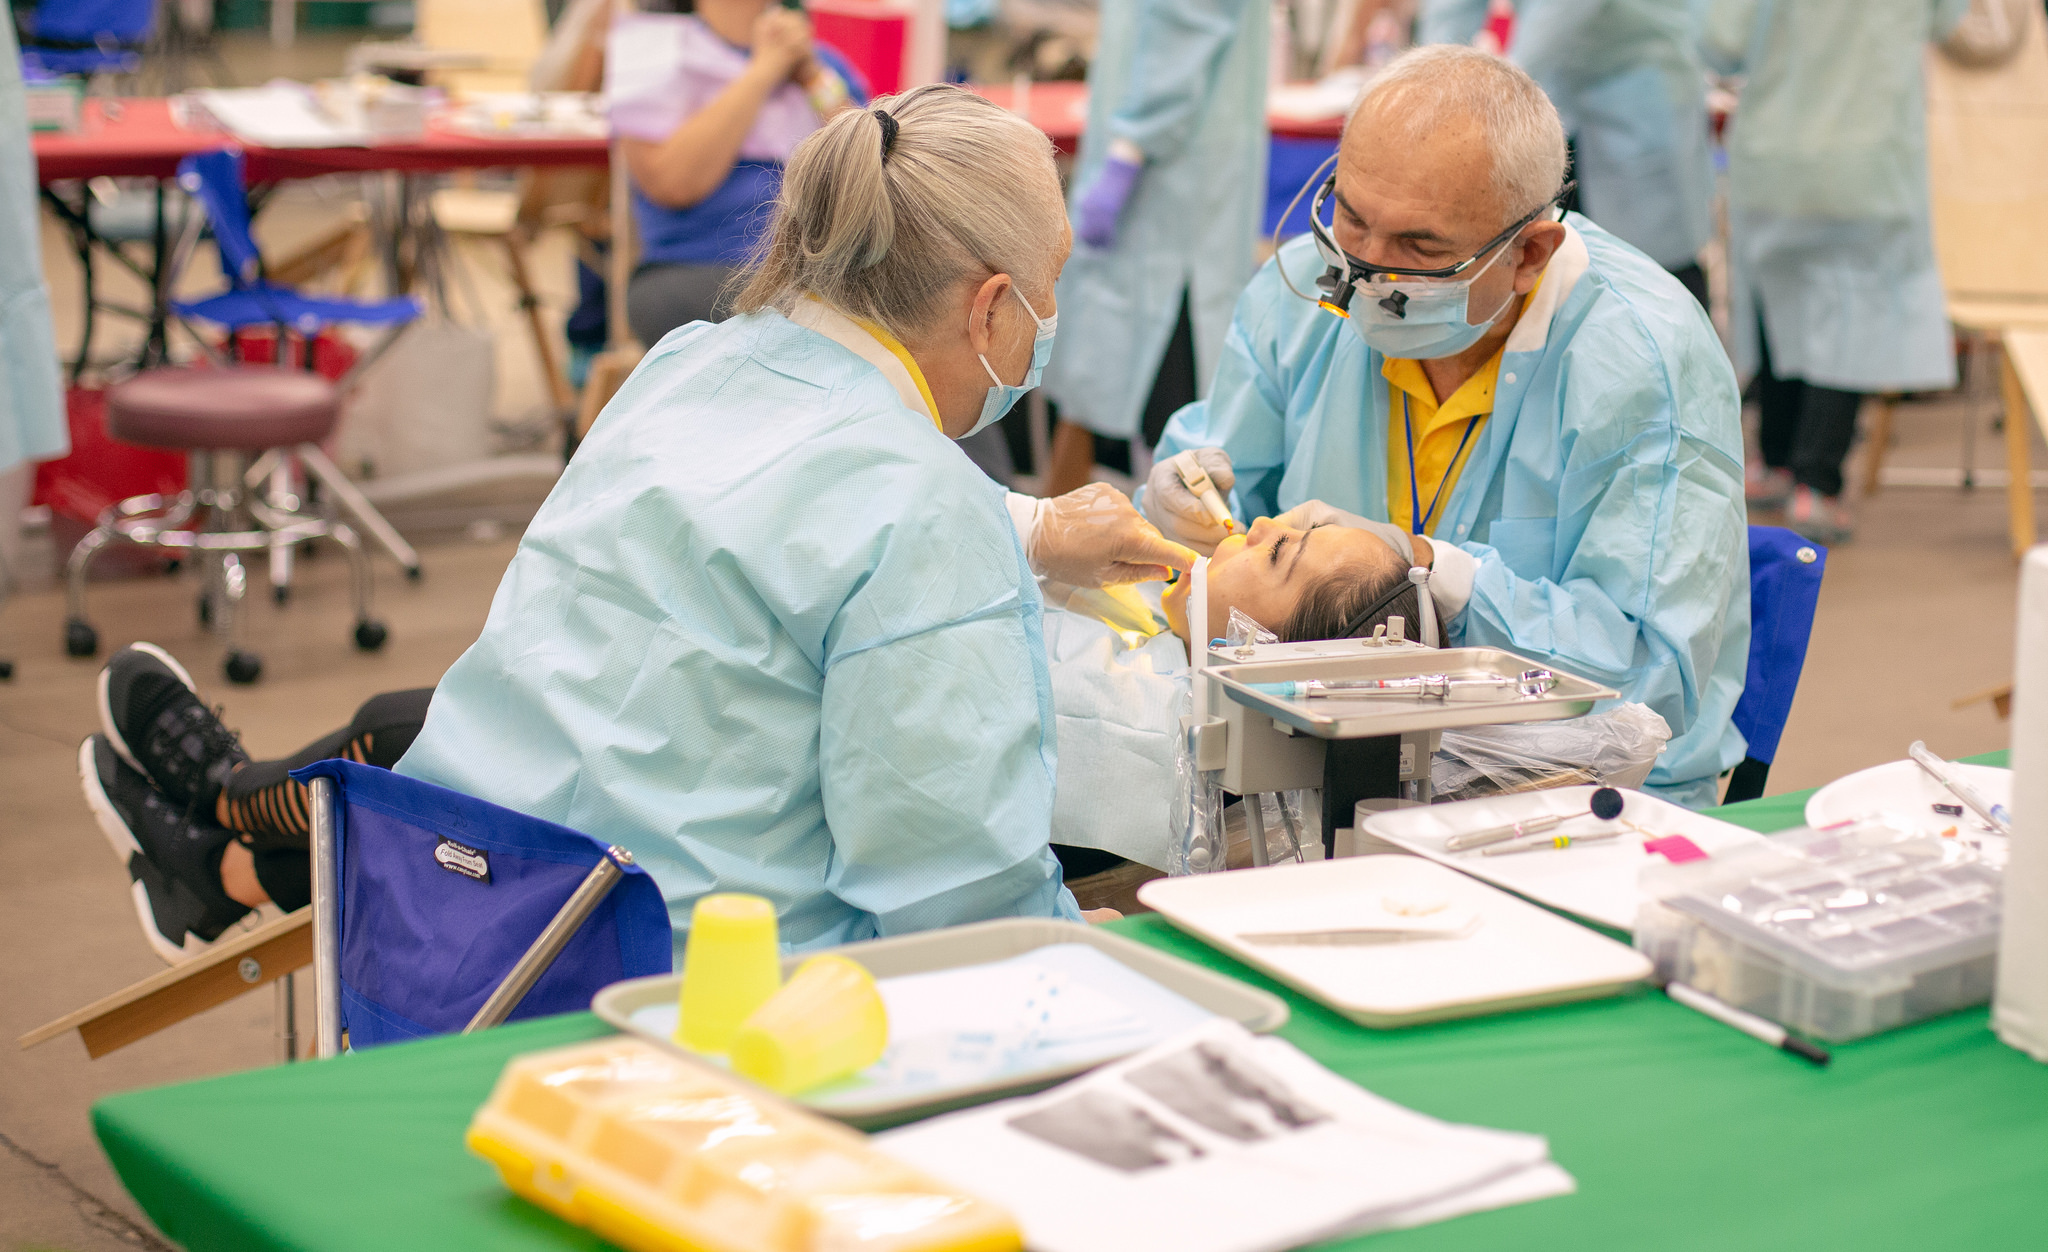 A patient receives dental care during the Sept. 19-21, 2018, mega clinic in Forth Worth, Texas. Photo by Pieter Damsteegt